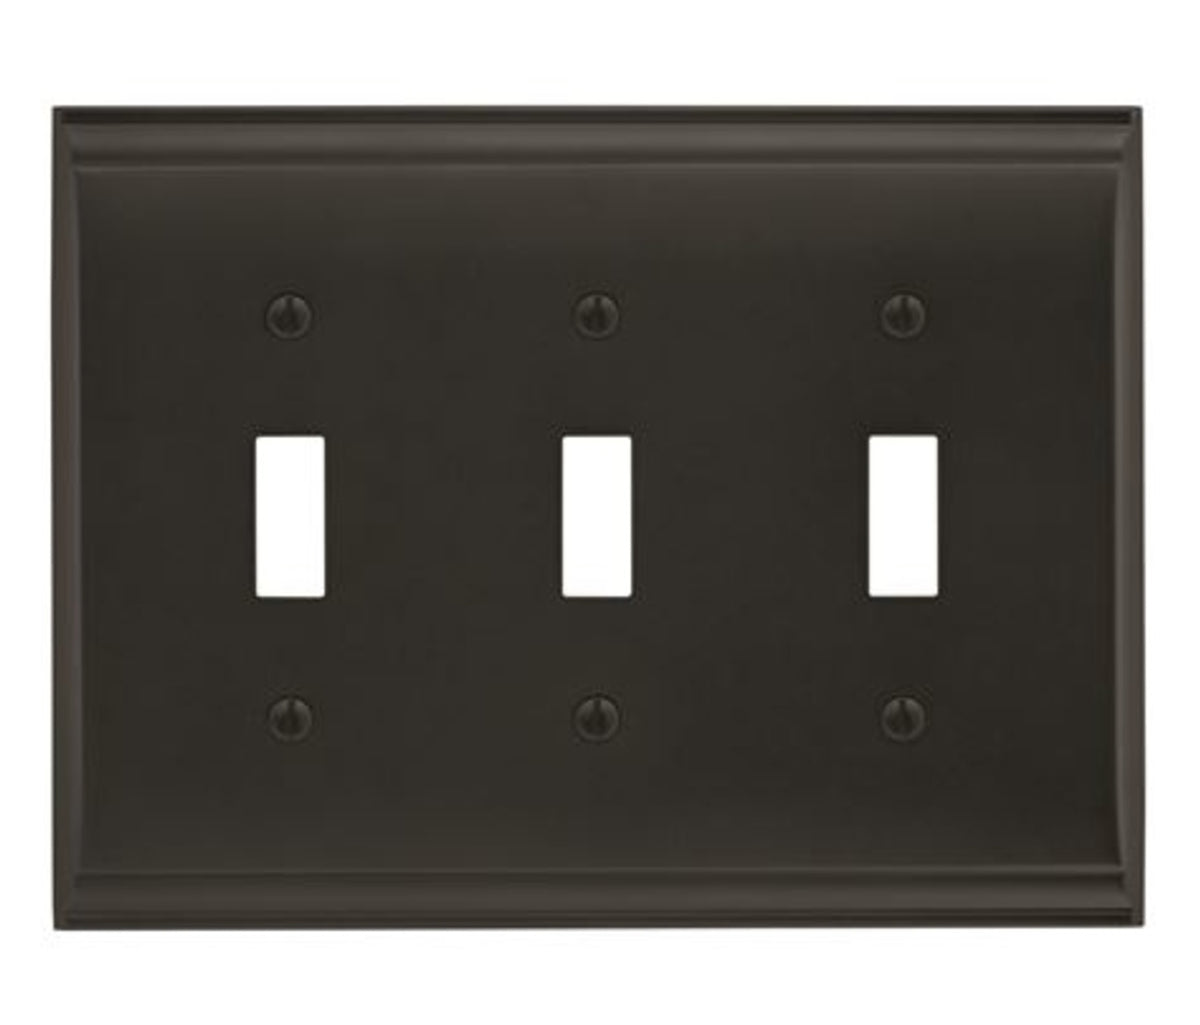 buy electrical wallplates at cheap rate in bulk. wholesale & retail home electrical equipments store. home décor ideas, maintenance, repair replacement parts